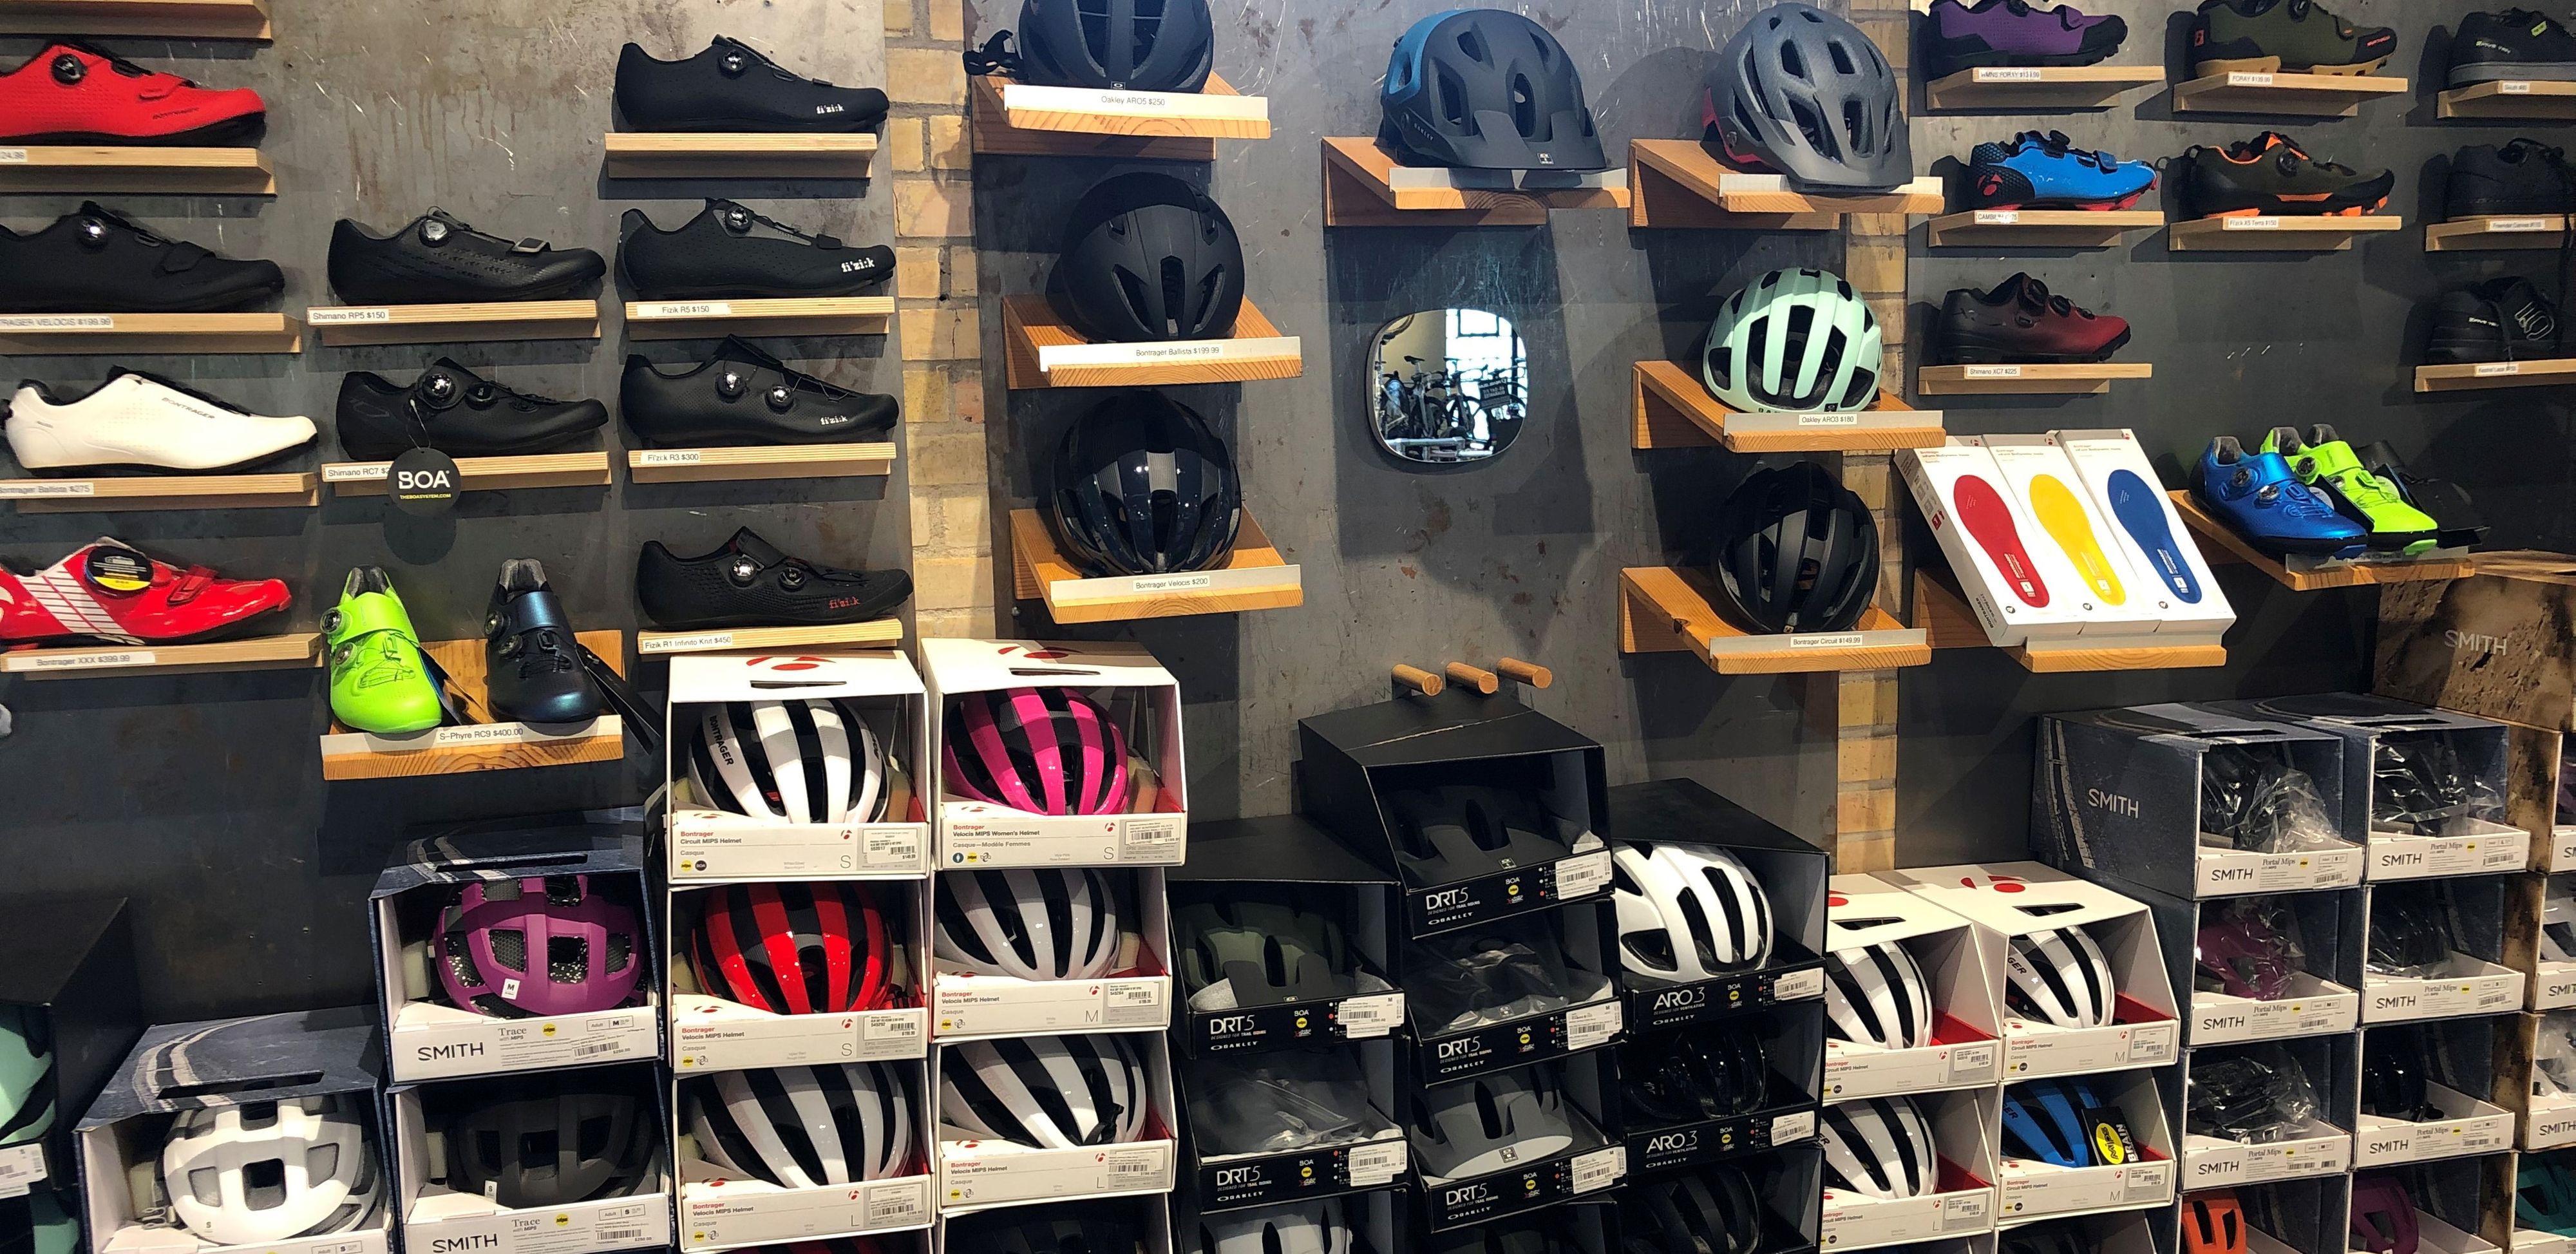 shoes and helmets.jpg